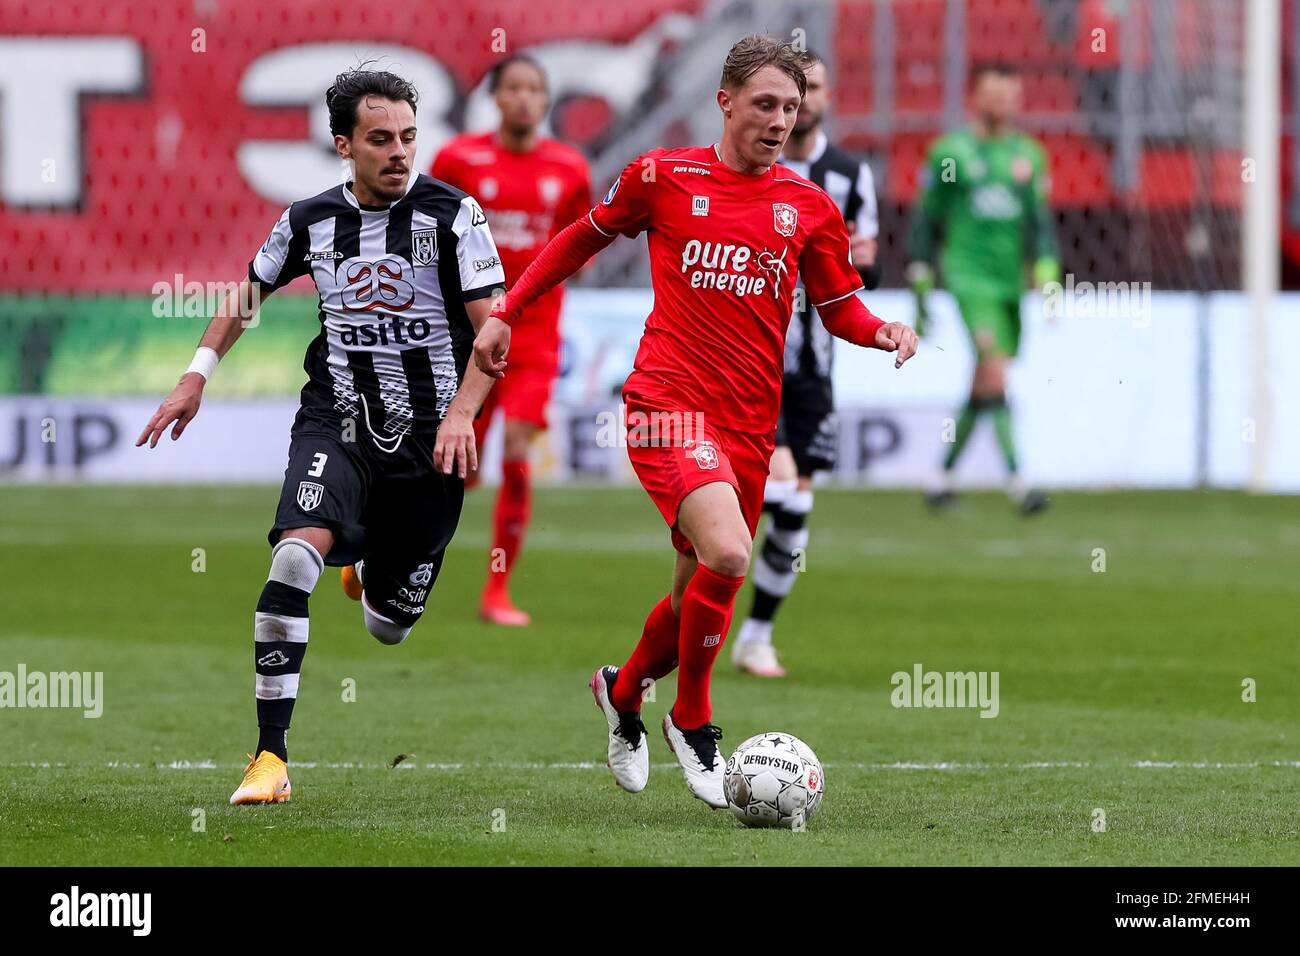 ENSCHEDE, NETHERLANDS - MAY 8: Giacomo Quagliata of Heracles Almelo and Jesse Bosch of FC Twente during the Dutch Eredivisie match between FC Twente and Heracles Almelo at Grolsch Veste on May 8, 2021 in Enschede, Netherlands (Photo by Marcel ter Bals/Orange Pictures) Stock Photo